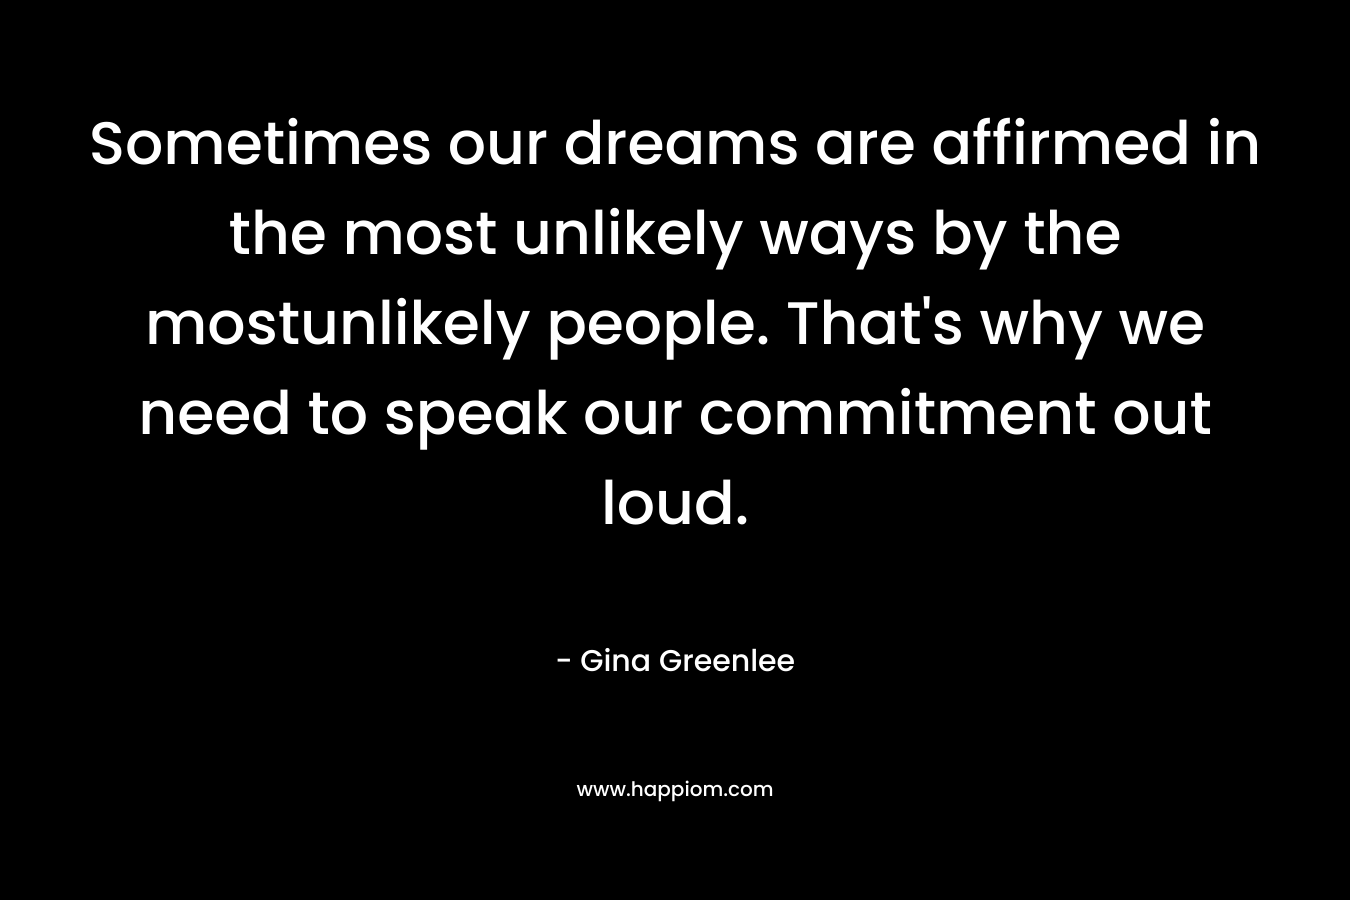 Sometimes our dreams are affirmed in the most unlikely ways by the mostunlikely people. That’s why we need to speak our commitment out loud. – Gina Greenlee